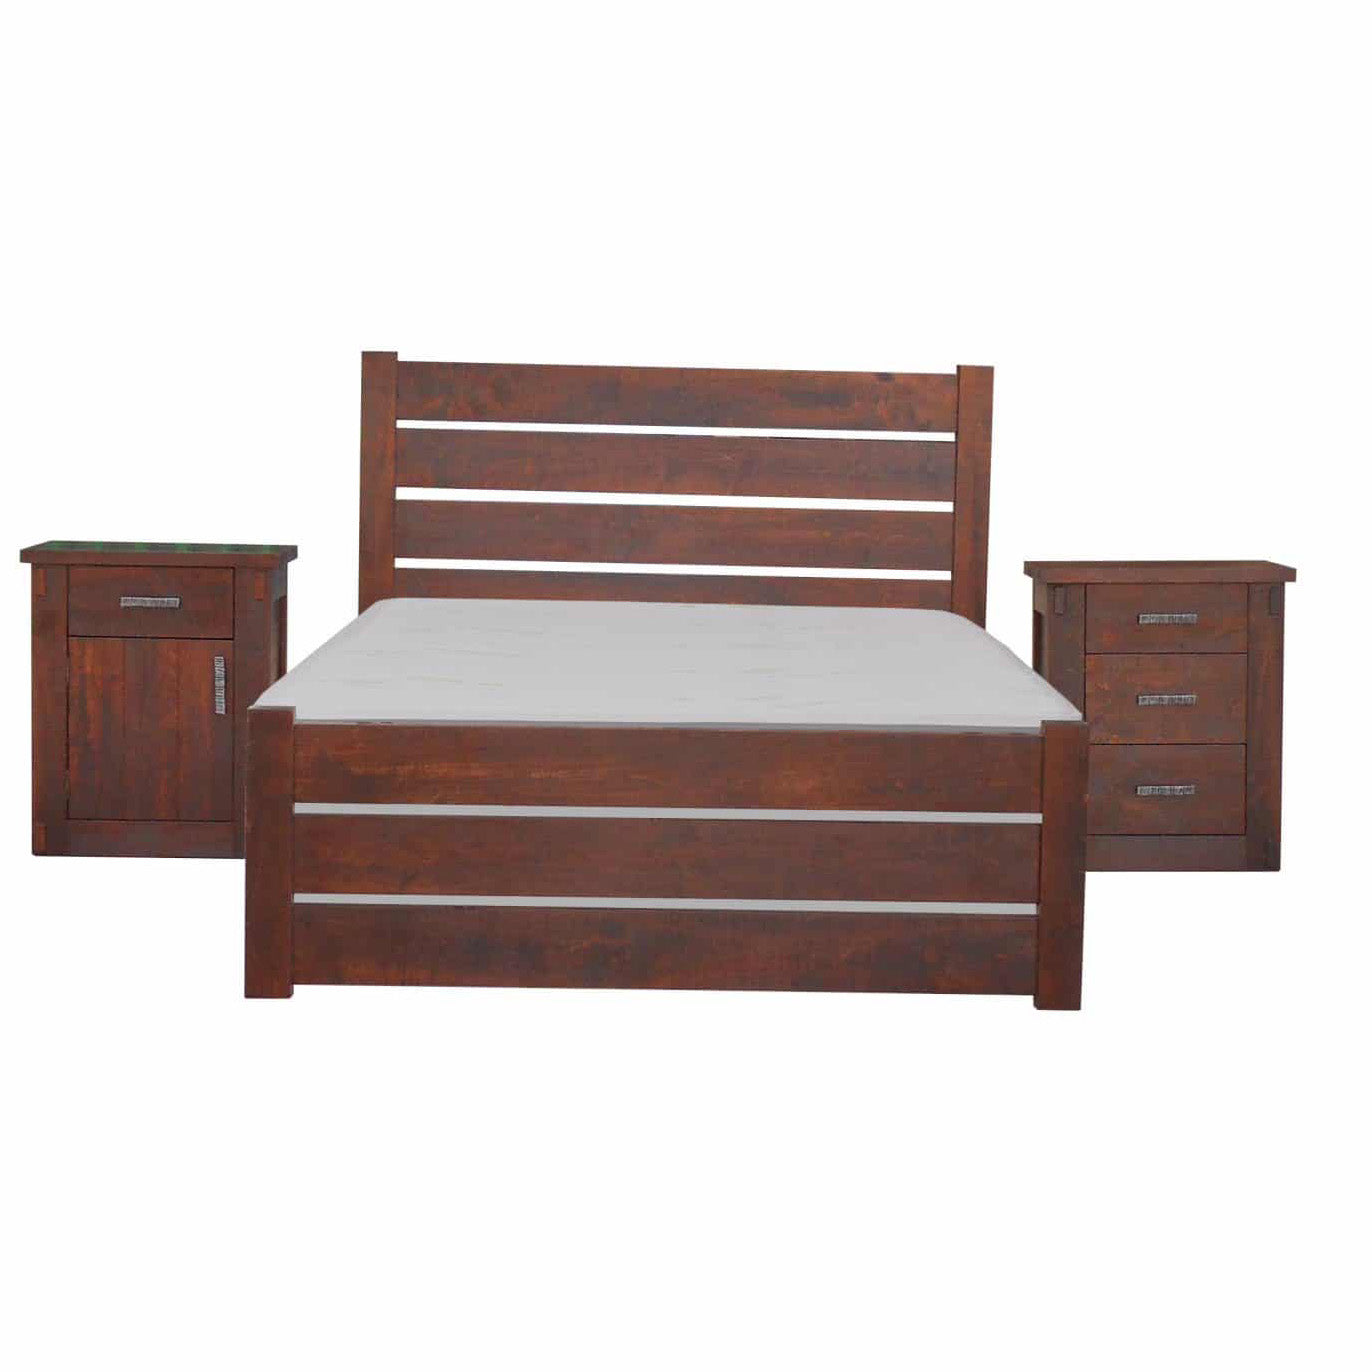 Homestead Bed with matching Nightstands